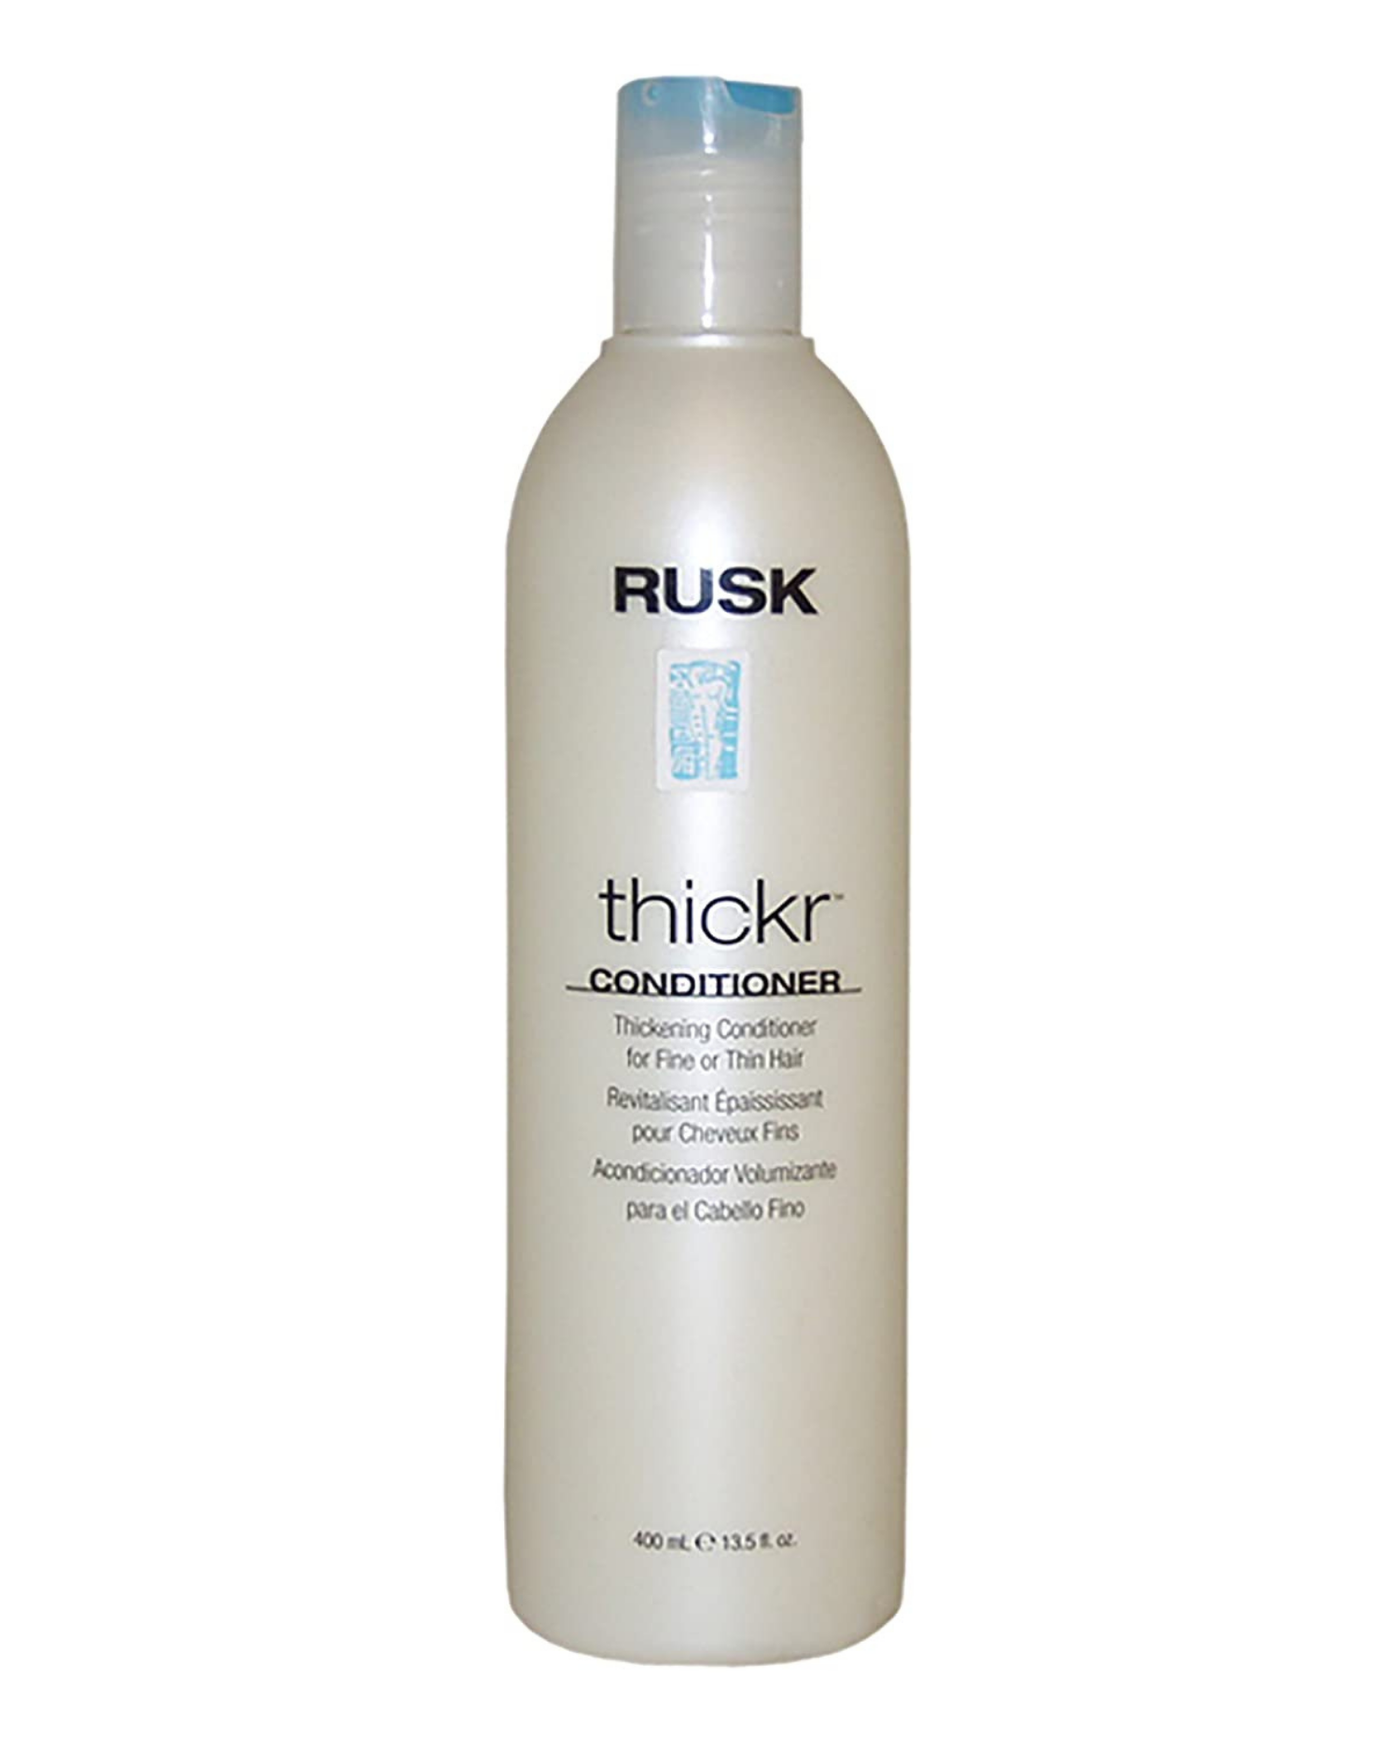 Rusk Thickr Thickening Conditioner 13.5 Oz.